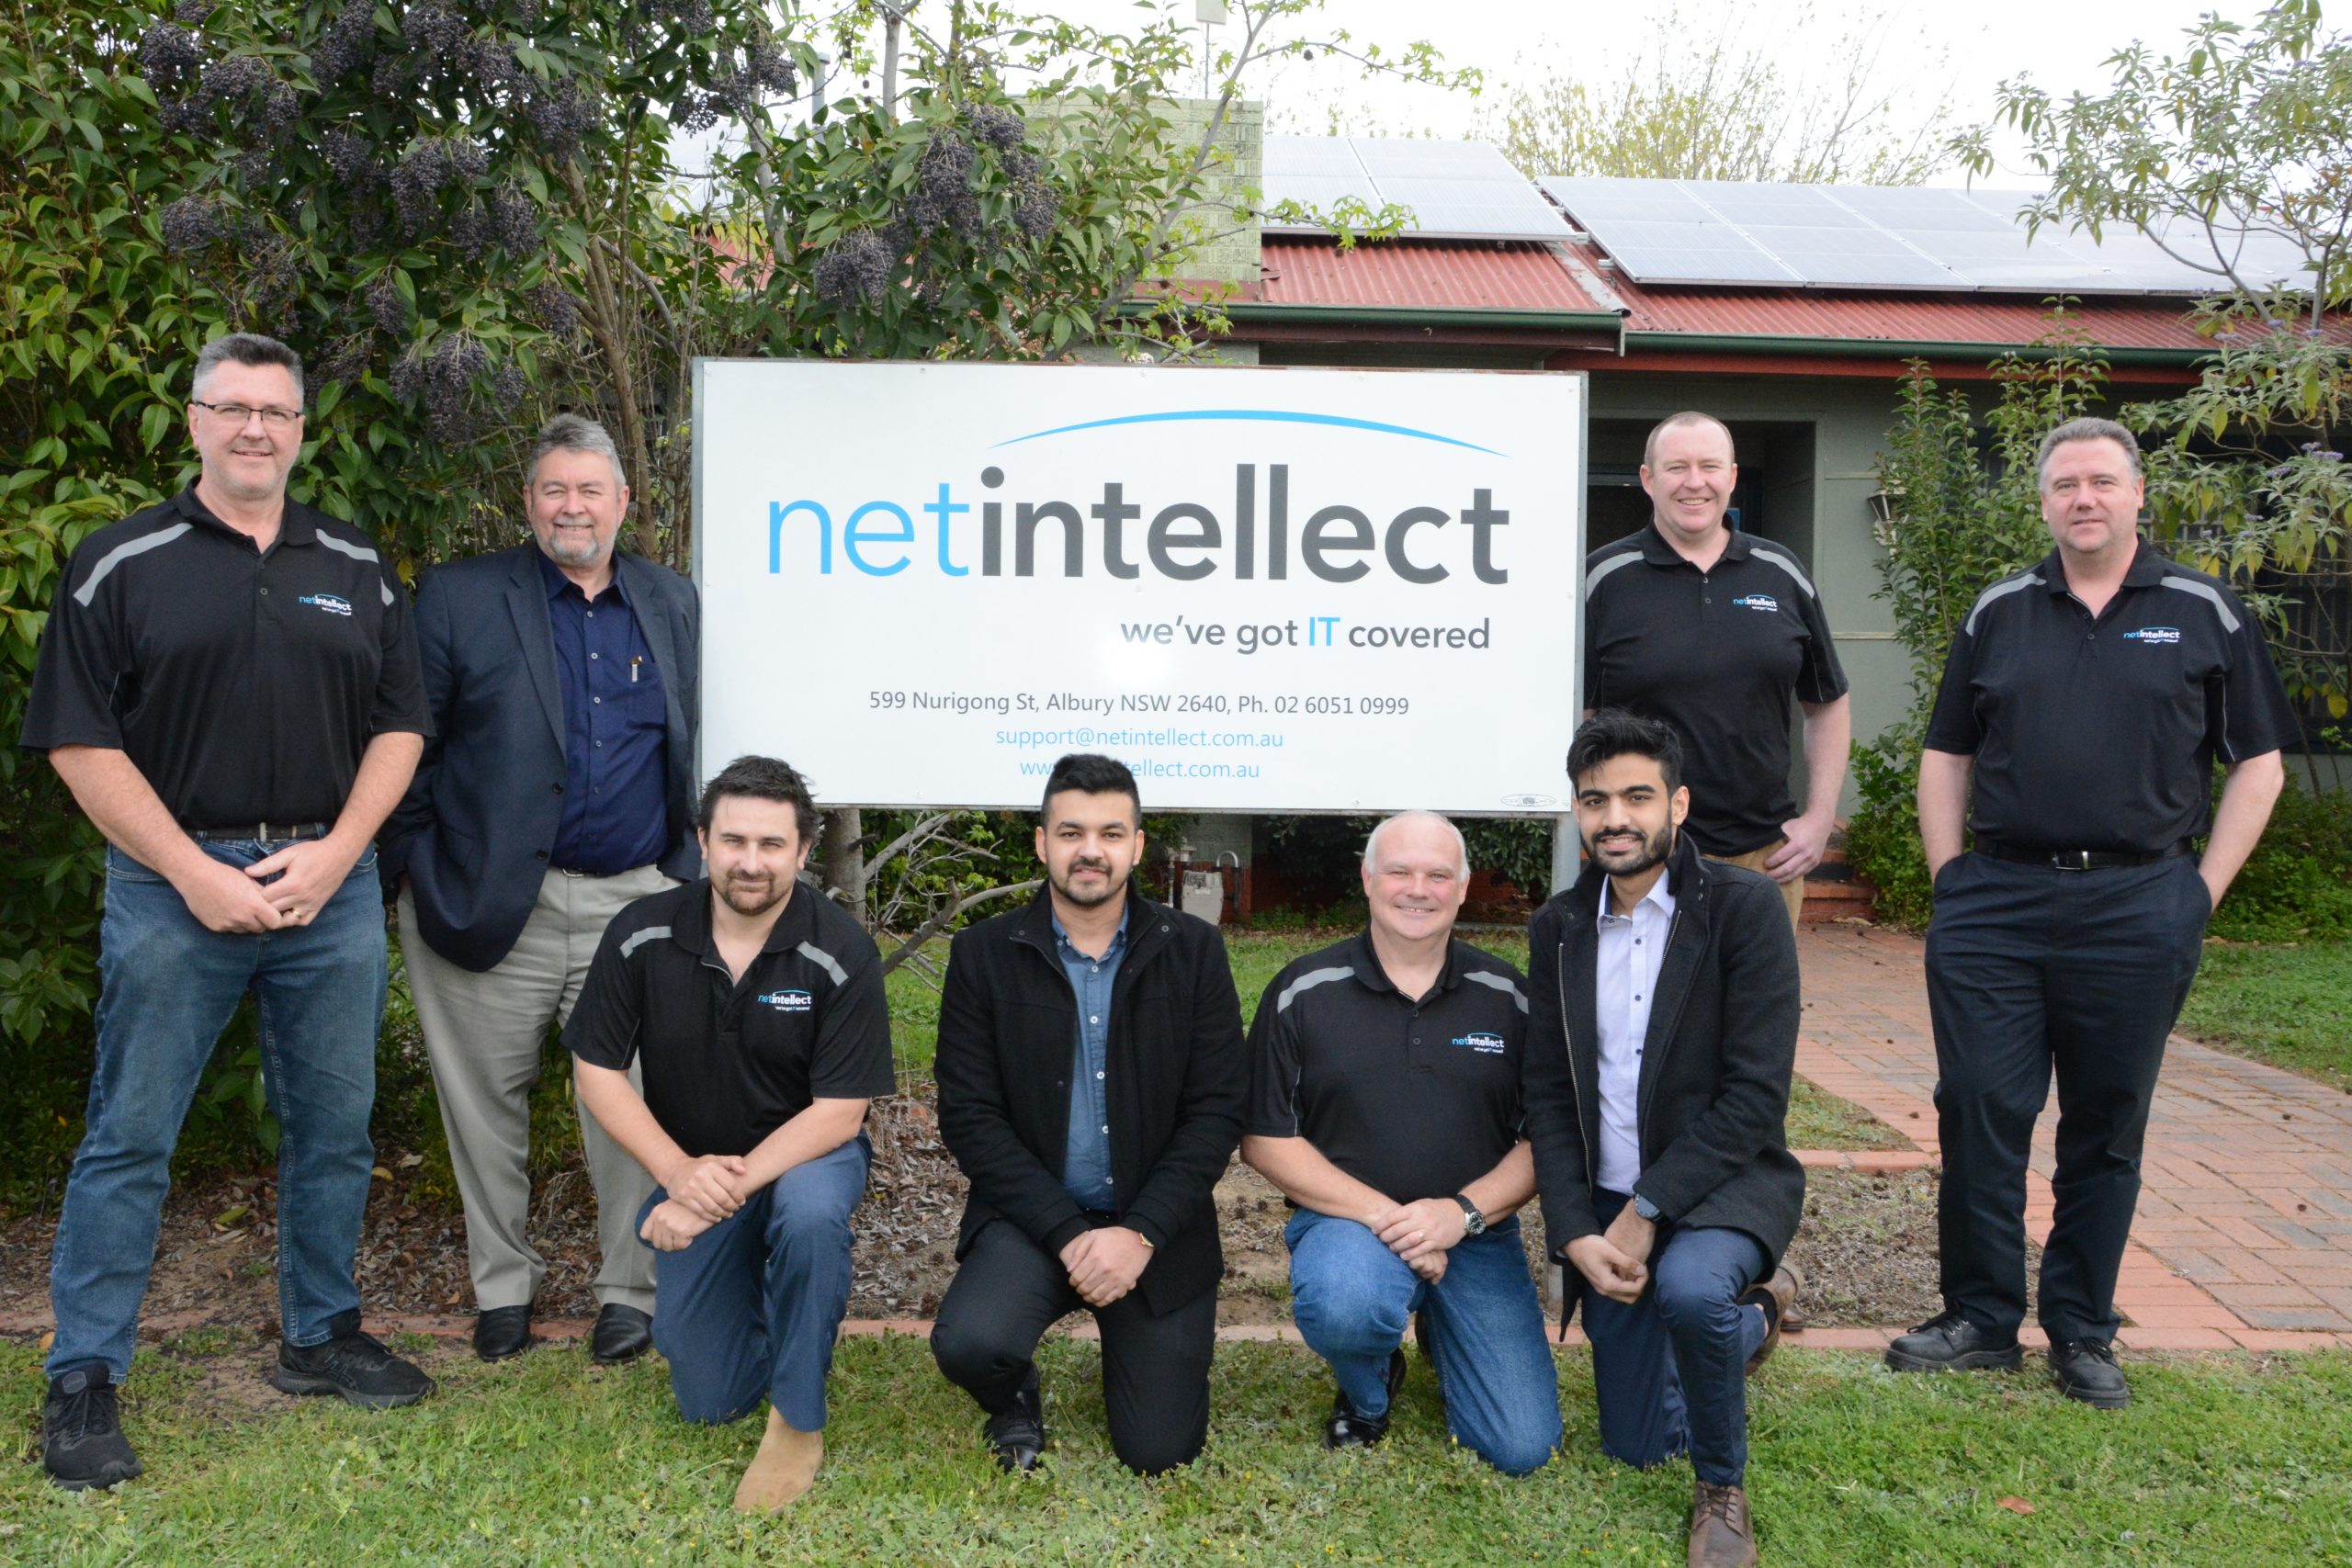 Network Solutions - Net Intellect: Servicing Albury Wodonga, Wagga, Shepparton and surrounding areas we specialise in IT Solutions, IT Support and managed IT services in northern VIC. Find: IT, IT Solutions, IT Support, Managed IT Services, like Broadband, VOIP, Disaster Recovery, and Networking near me.